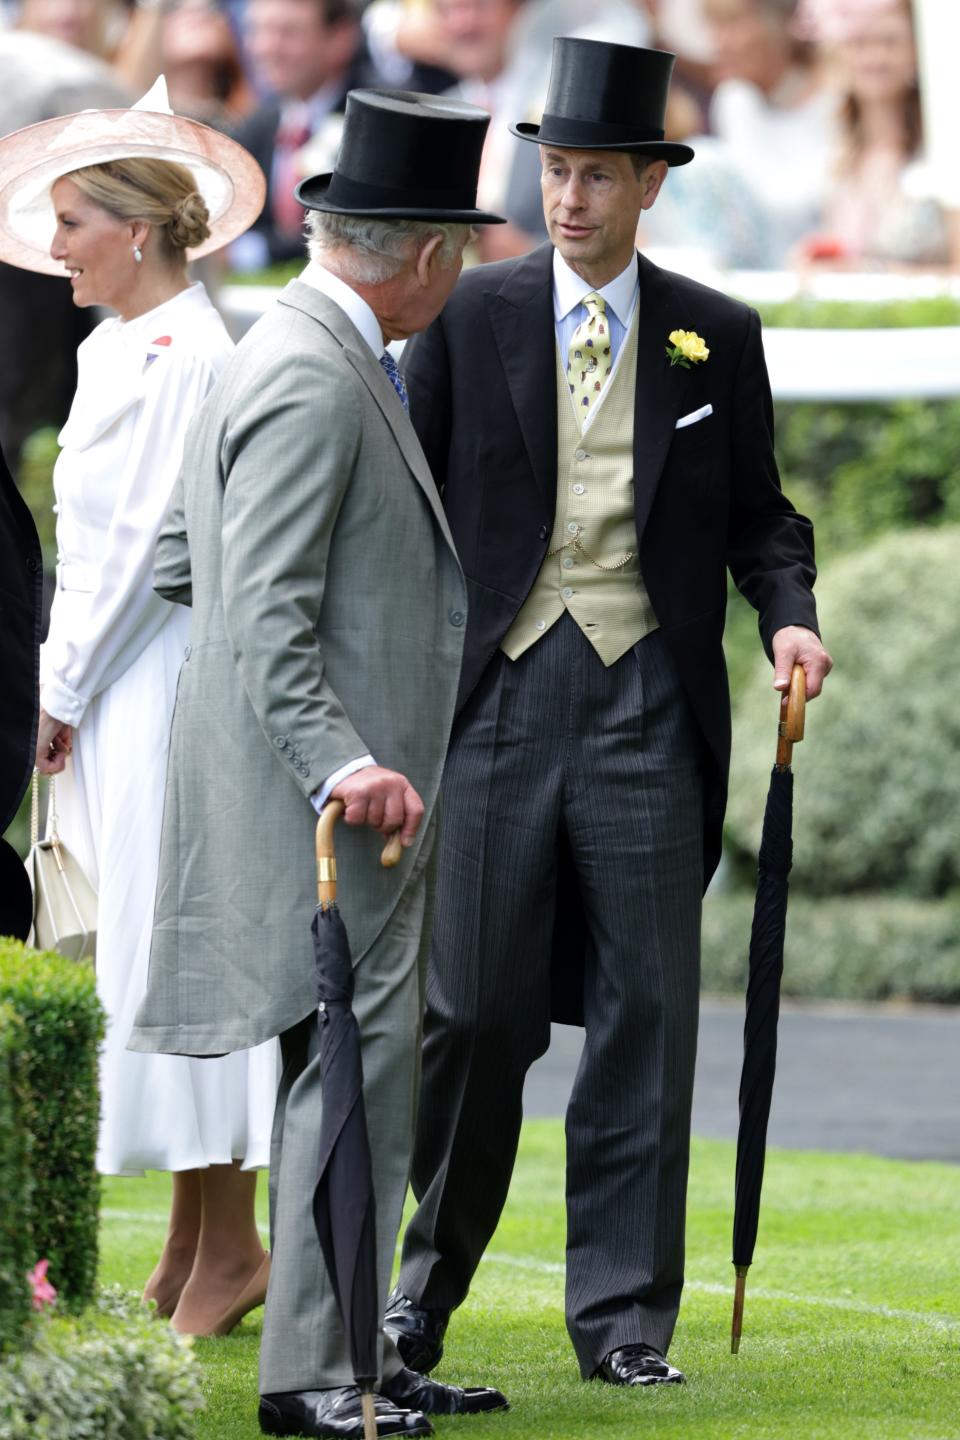 King Charles III and Prince Edward, Duke of Edinburgh attend day two of Royal Ascot 2023 at Ascot Racecourse on June 21, 2023 in Ascot, England.